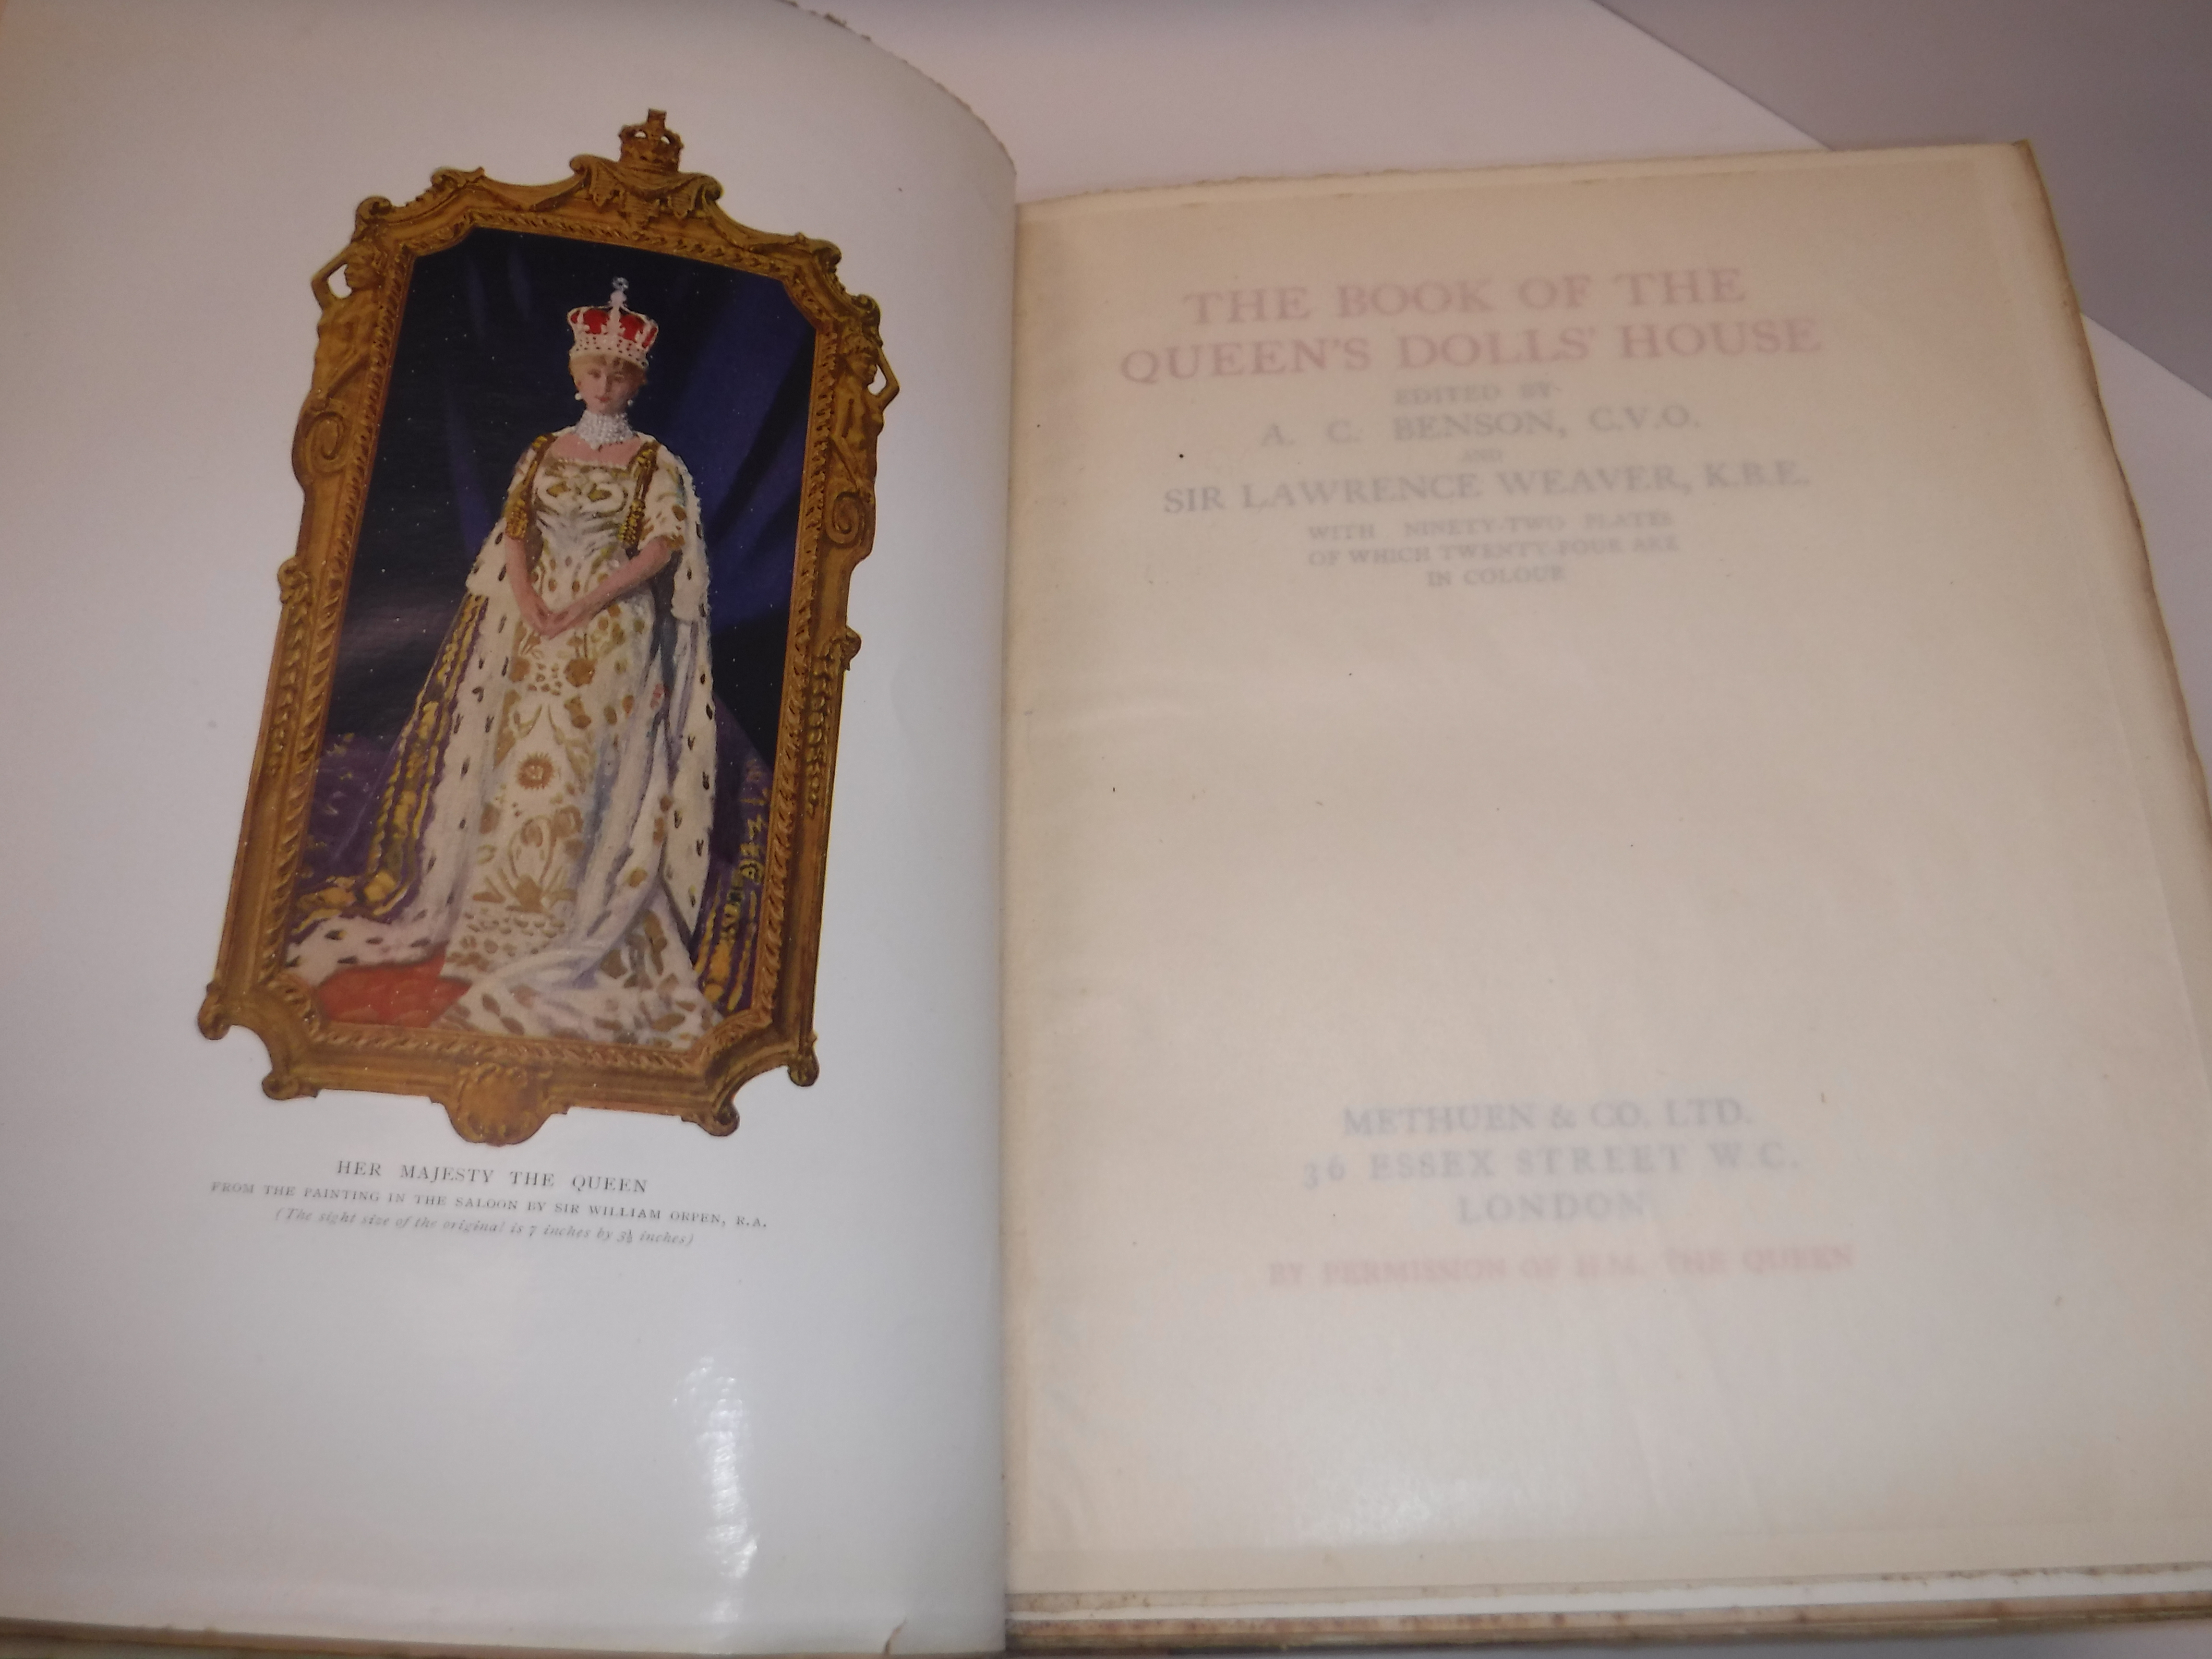 One volume "The Book of the Queen's Doll - Image 2 of 4